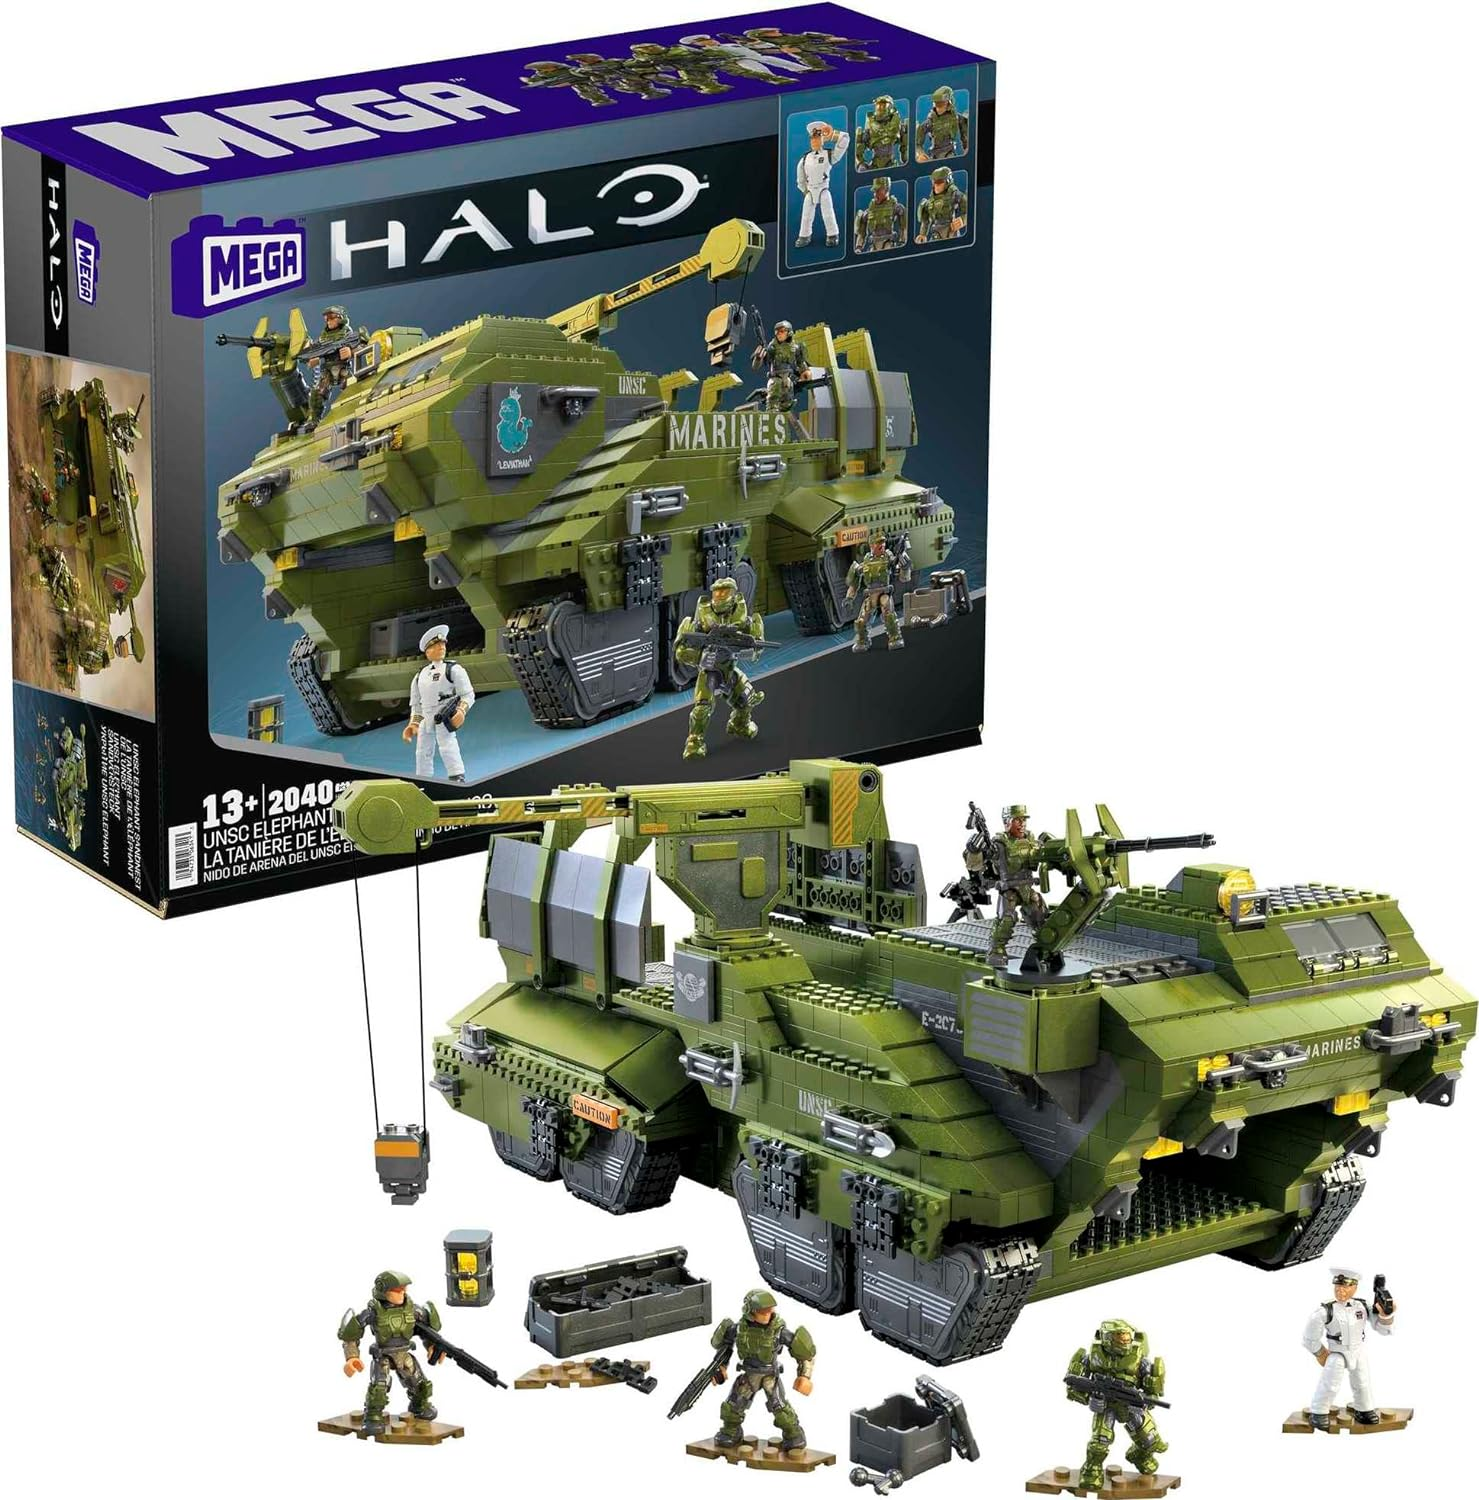 Amazon.com: MEGA Halo Infinite Toys Building Set for Kids, Unsc Elephant Sandnest Tank with 2041 Pieces, 5 Poseable Micro Action Figures and Accessories : Toys & Games $109.99